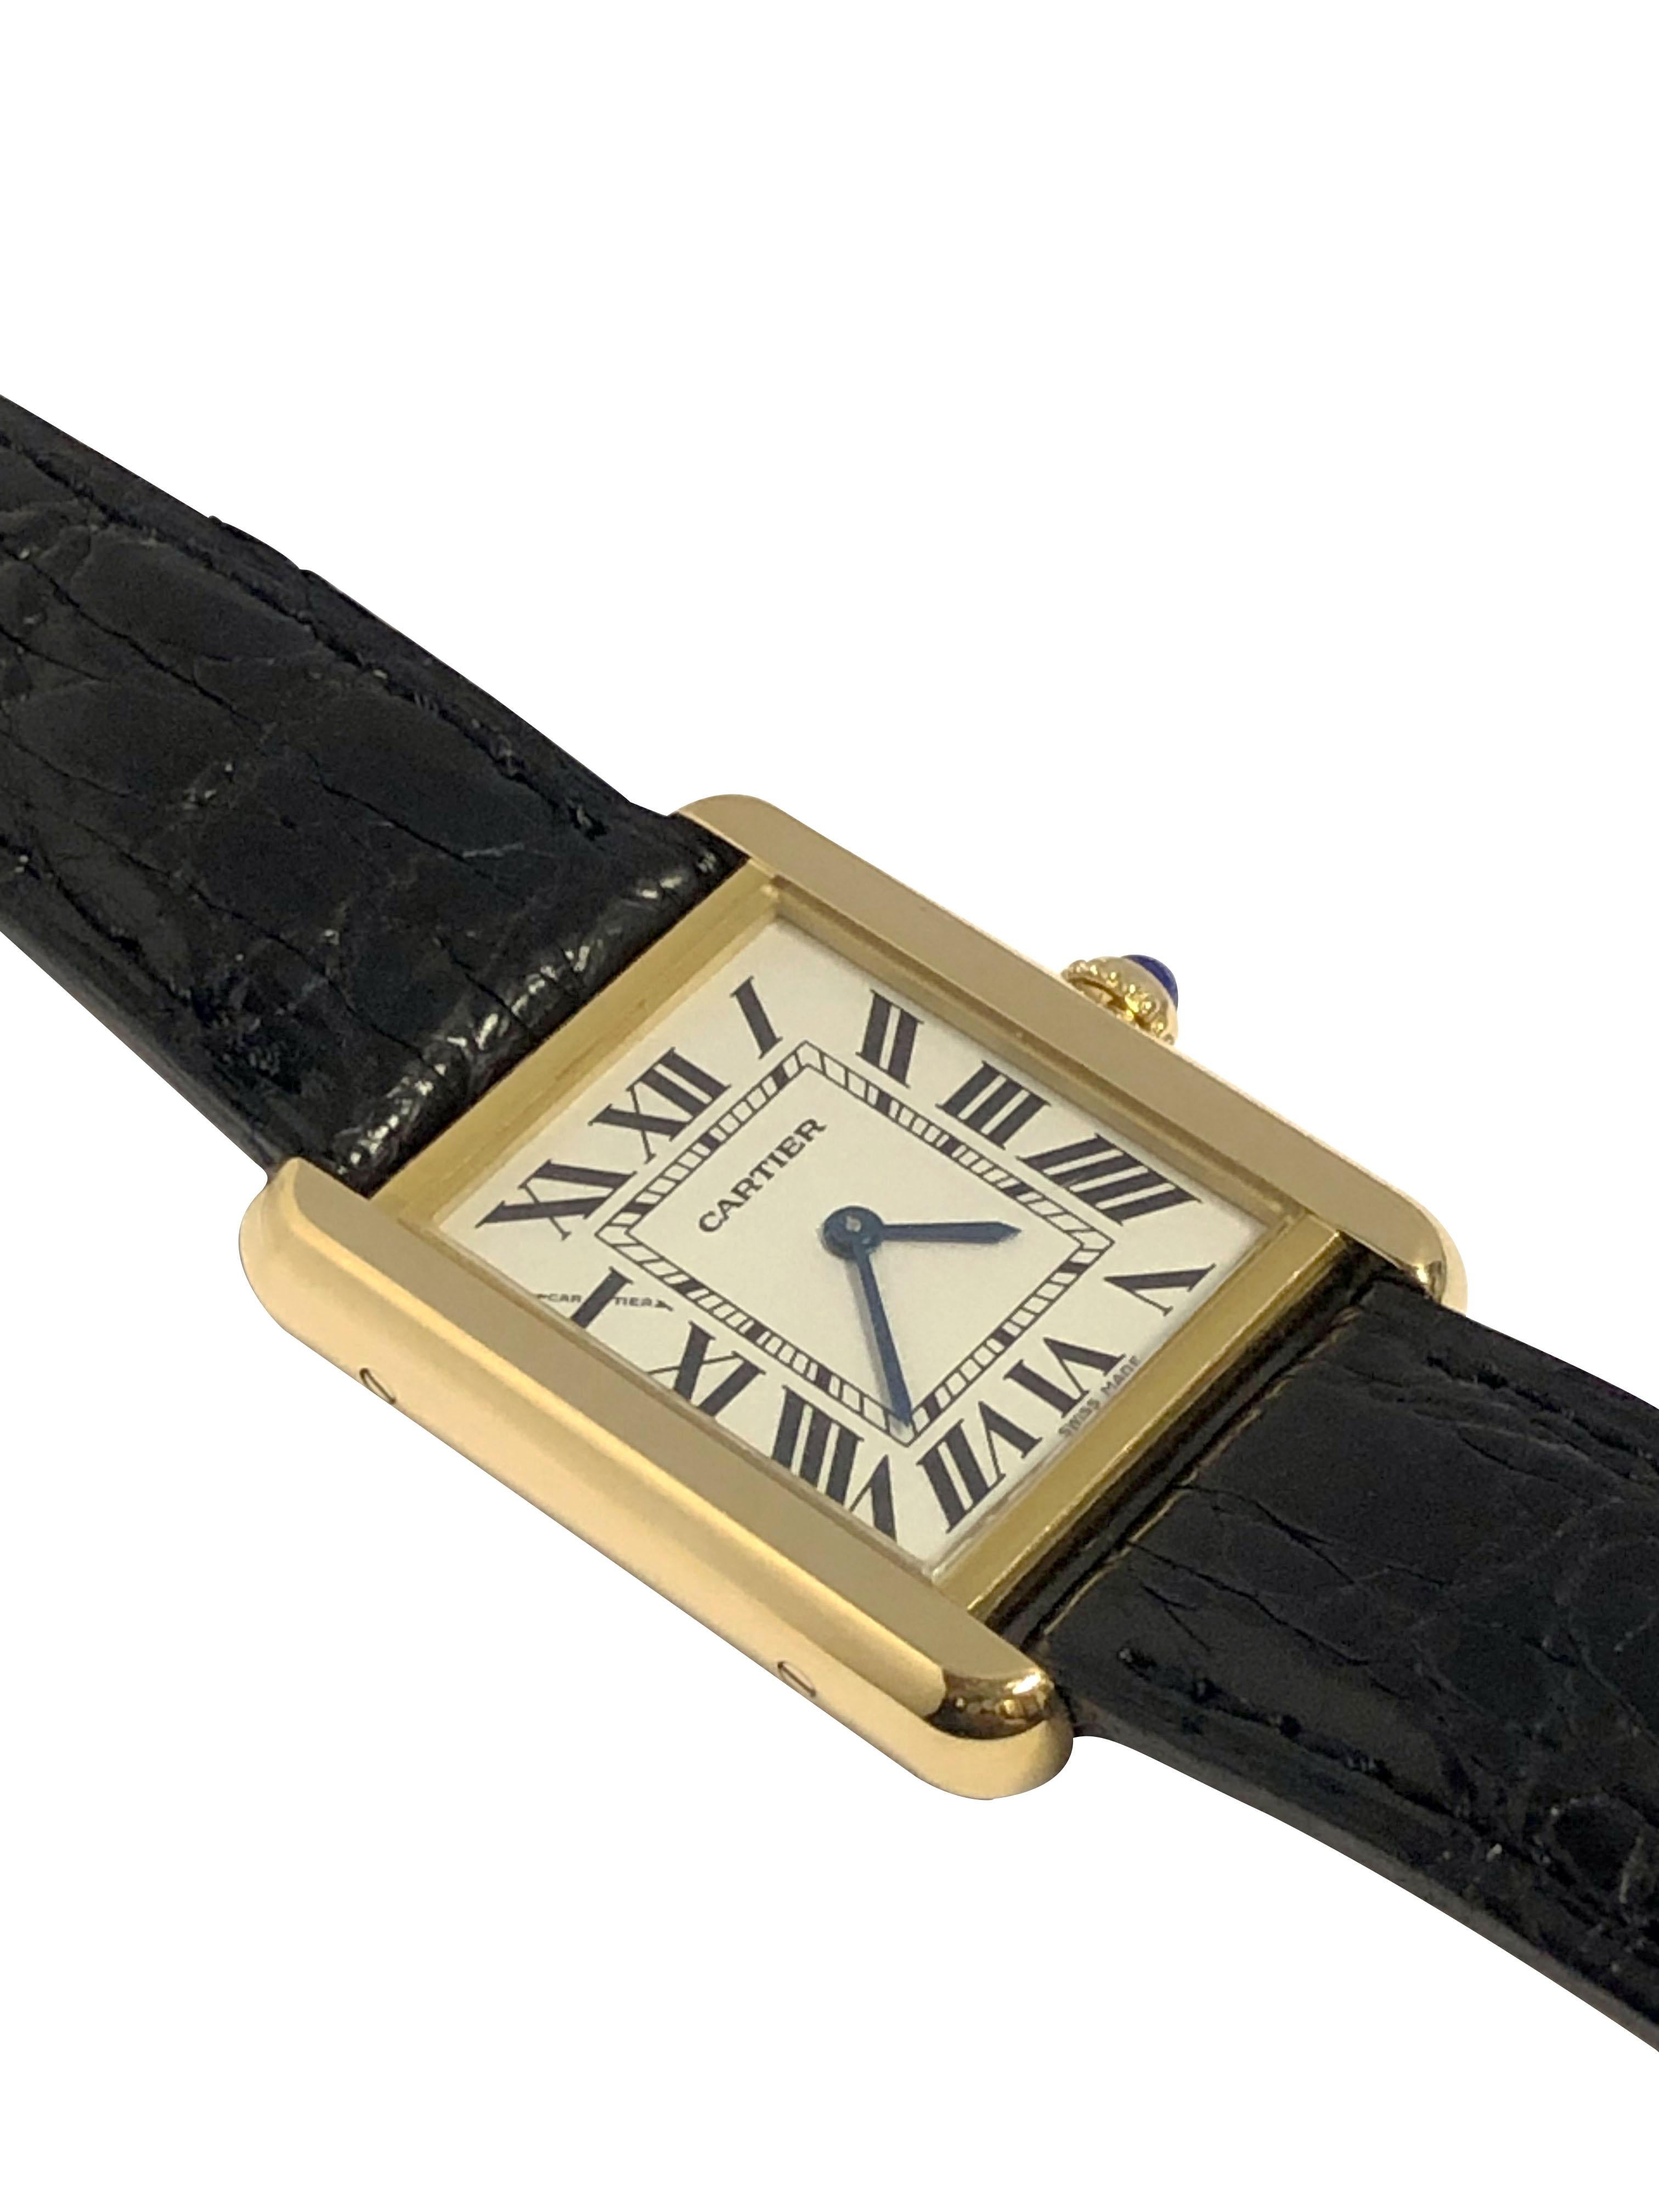 Circa 2015 Cartier Tank Solo Reference 2743 Wrist Watch, 24 x 24 M.M. 2 piece 18k Yellow Gold with Stainless Steel back water resistant case. Quartz Movement, Silver White Dial with Black Roman numerals, Sapphire set crown.  Original Croco Grain